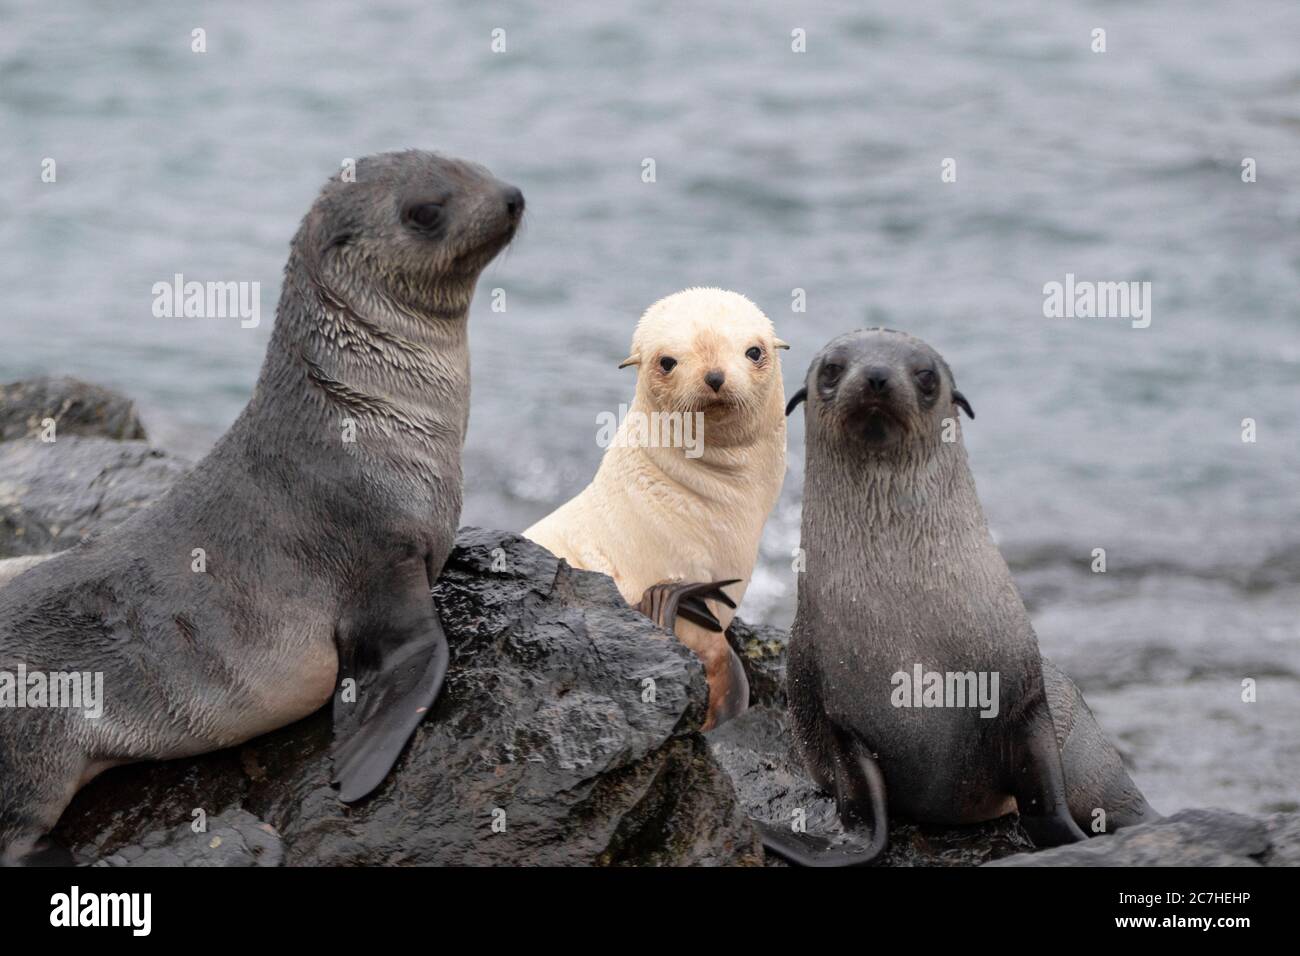 One in a thousand, leucistic Antarctic fur seal, friendship, pigment, anamoly, nature's beauty, rare animal, fur seal pups, hauled-out, nursery group, Stock Photo